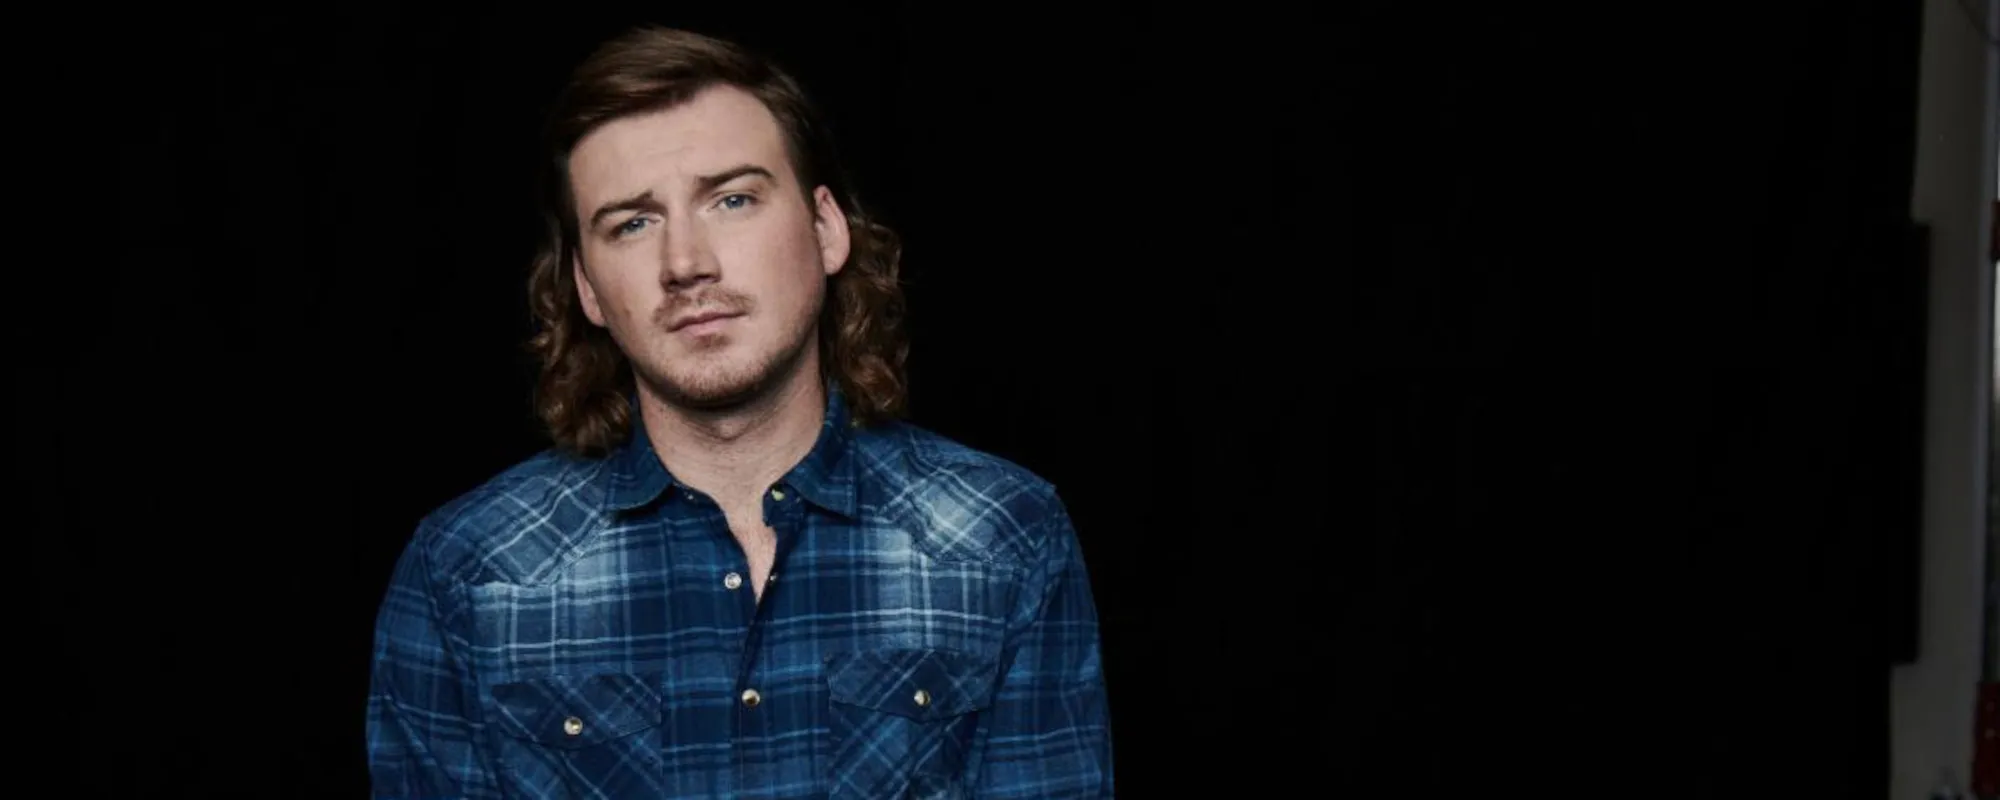 Behind the Meaning of Morgan Wallen’s Hit Song, “You Proof”